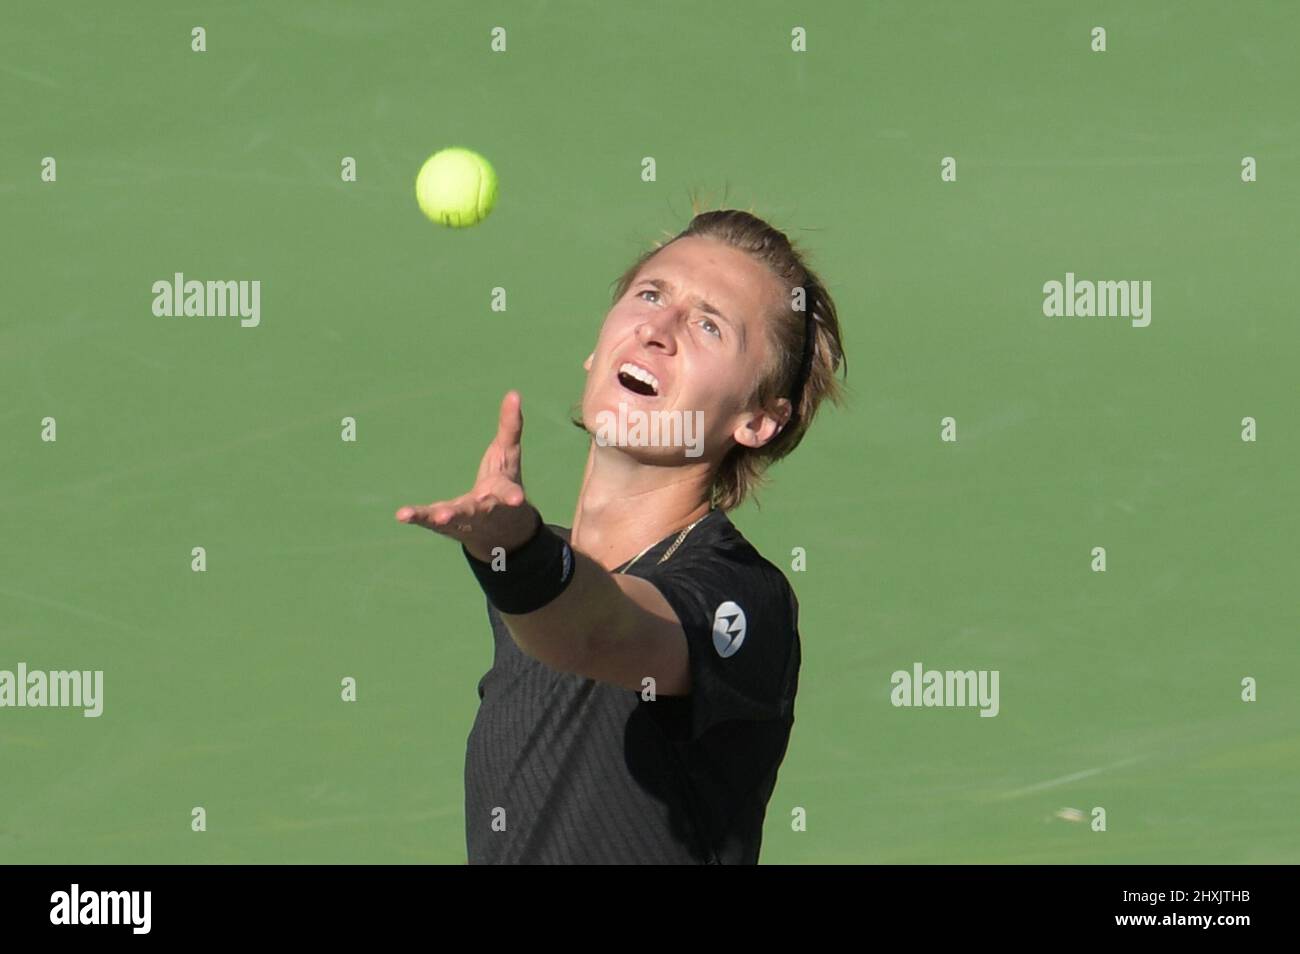 Sebastian Korda (USA) is defeated by Rafael Nadal (ESP) 2-6, 6-1, 6-7 (3-7), at the BNP Paribas Open being played at Indian Wells Tennis Garden in Indian Wells, California on March 12, 2022: © Karla Kinne/Tennisclix/CSM Stock Photo